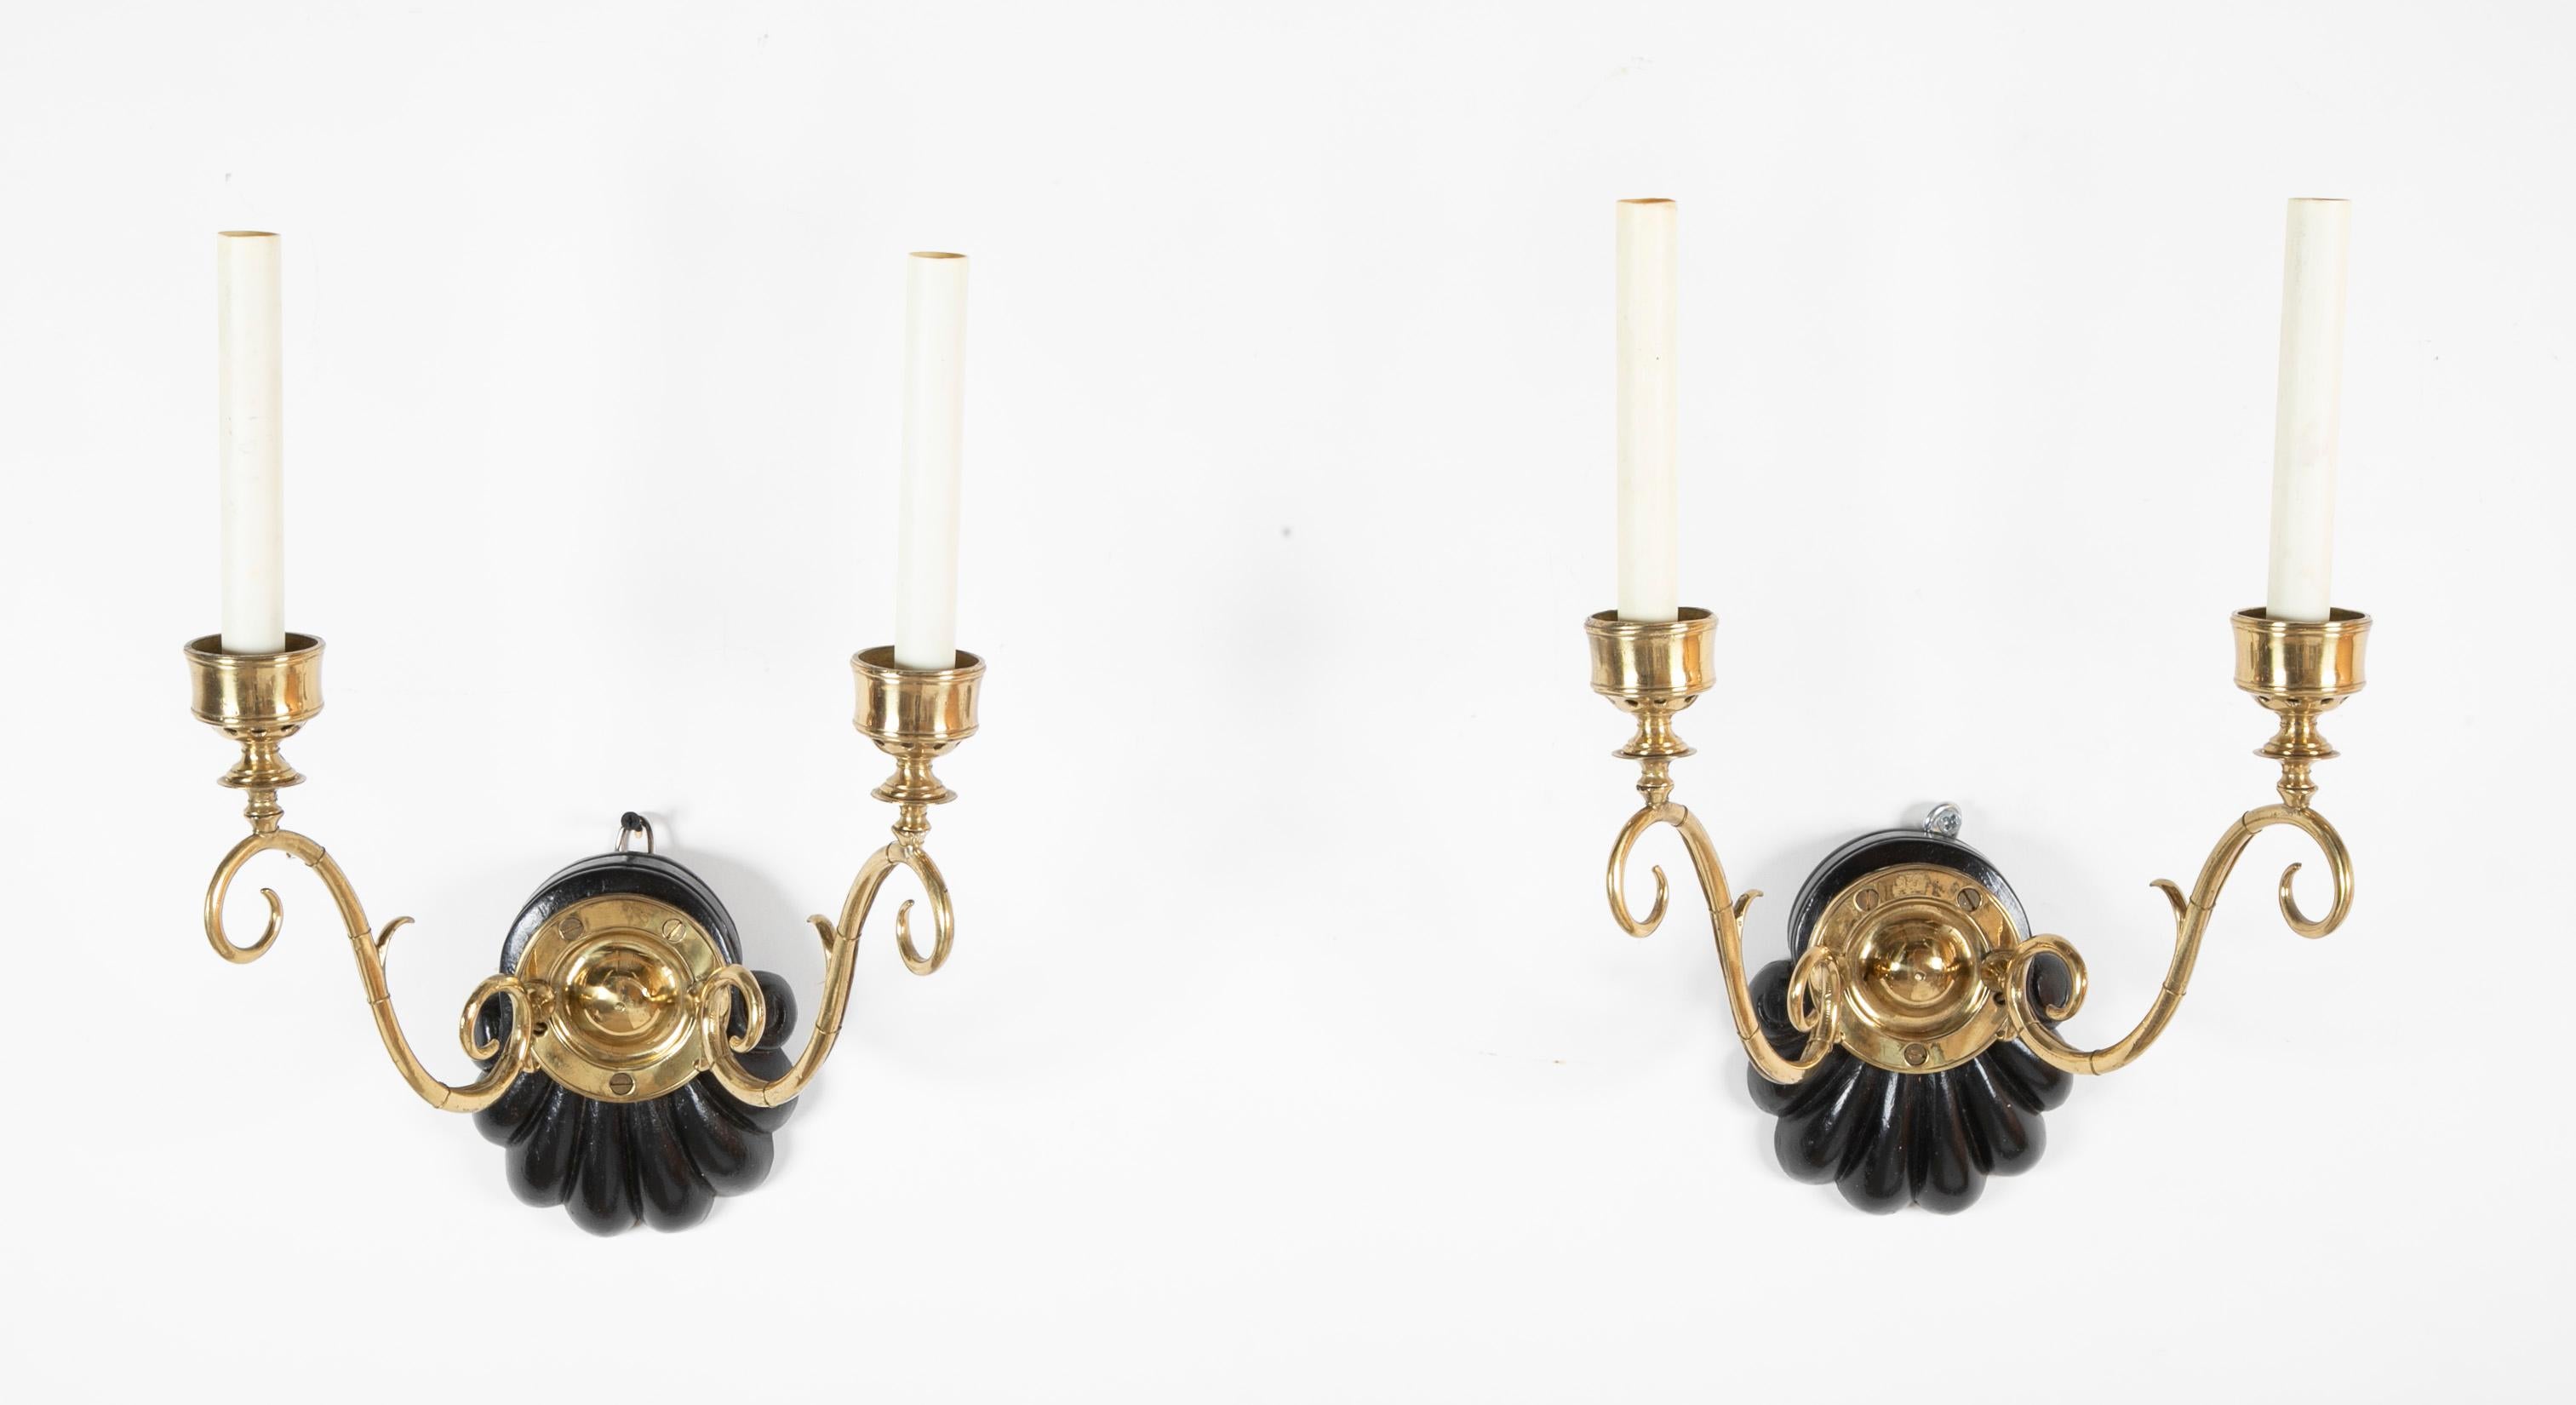 A handsome pair of wall sconces with elegant bronze arms mounted on carved scallop shell-form bases. Anglo-Indian, circa 1900. Electrified. 
17 in high by 11.5 wide by 9 deep.